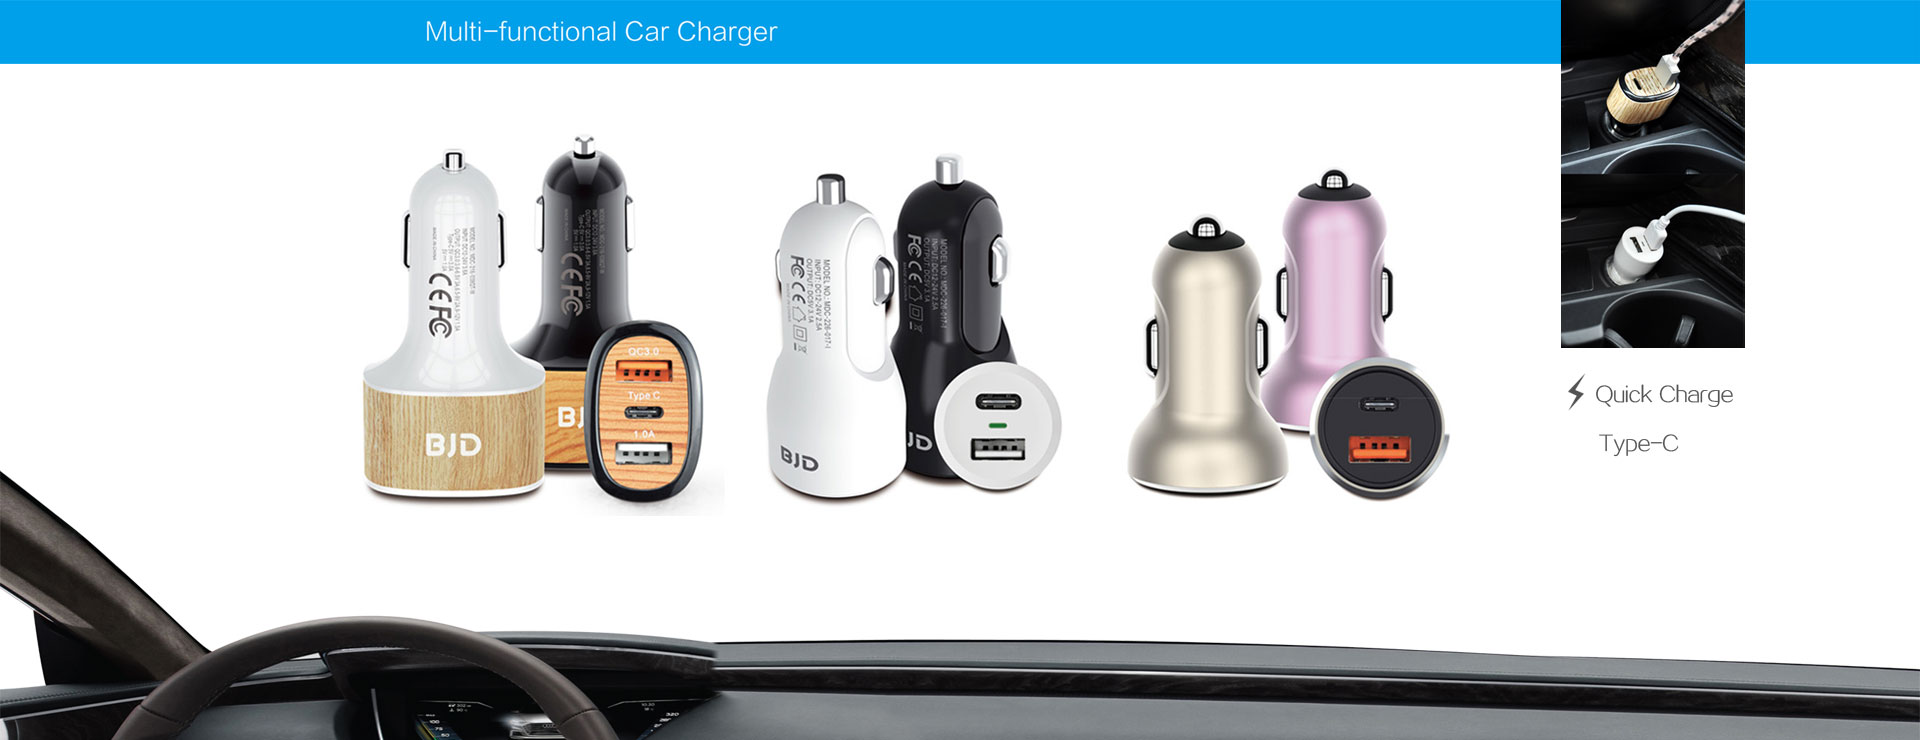 BJD Multifunctional Car Charger